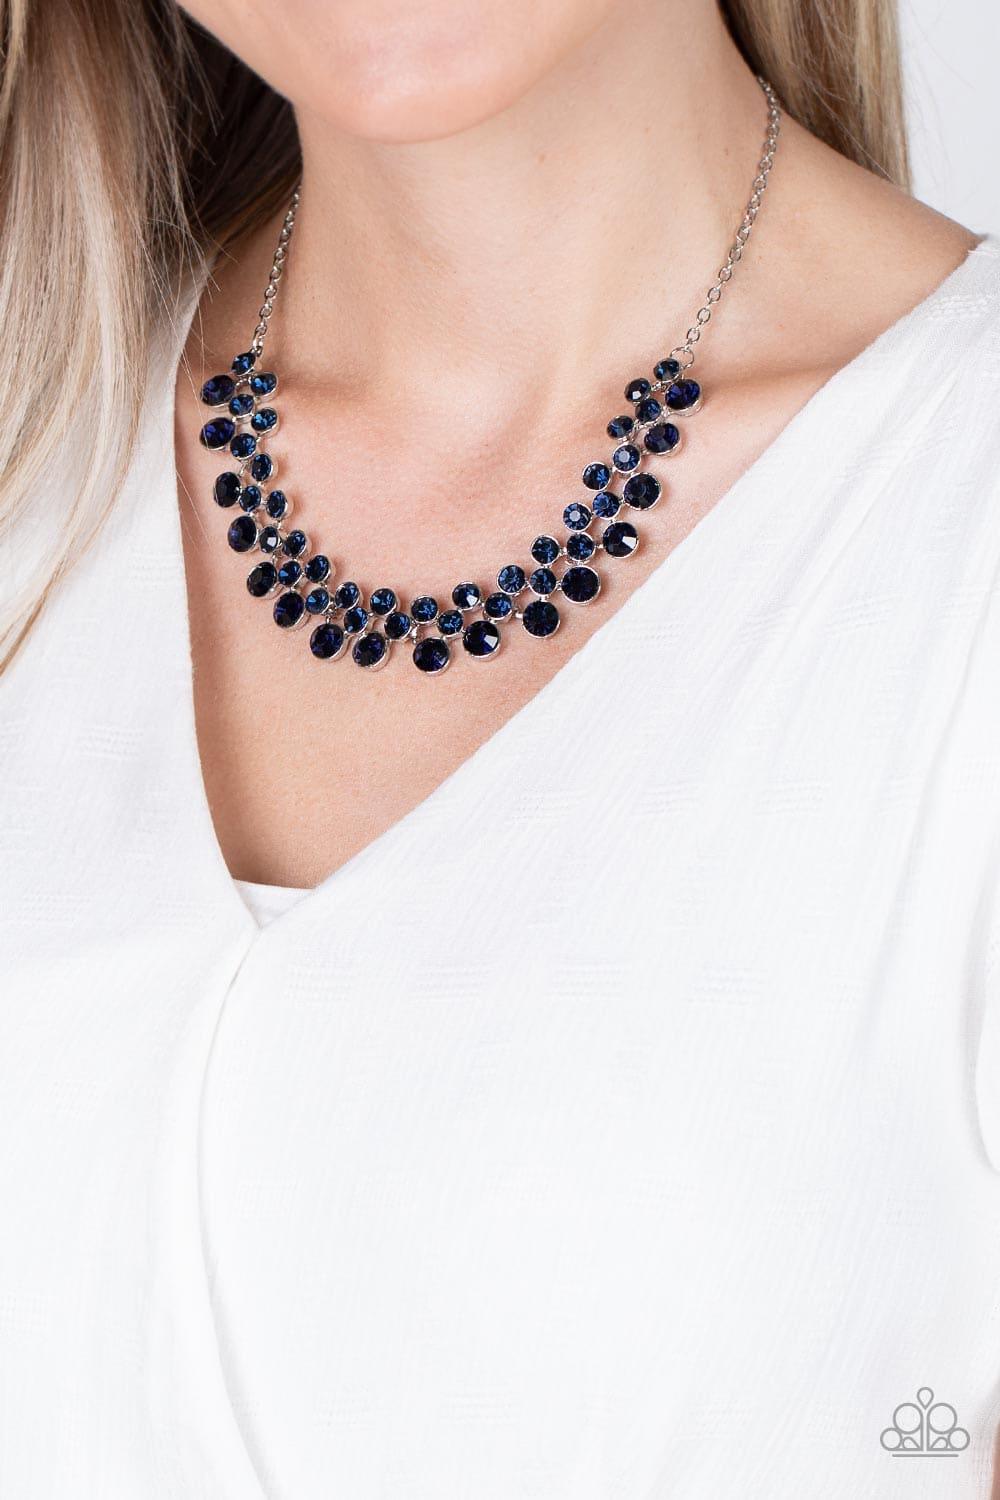 Paparazzi Accessories - Won The Lottery - Blue Necklace - Bling by JessieK